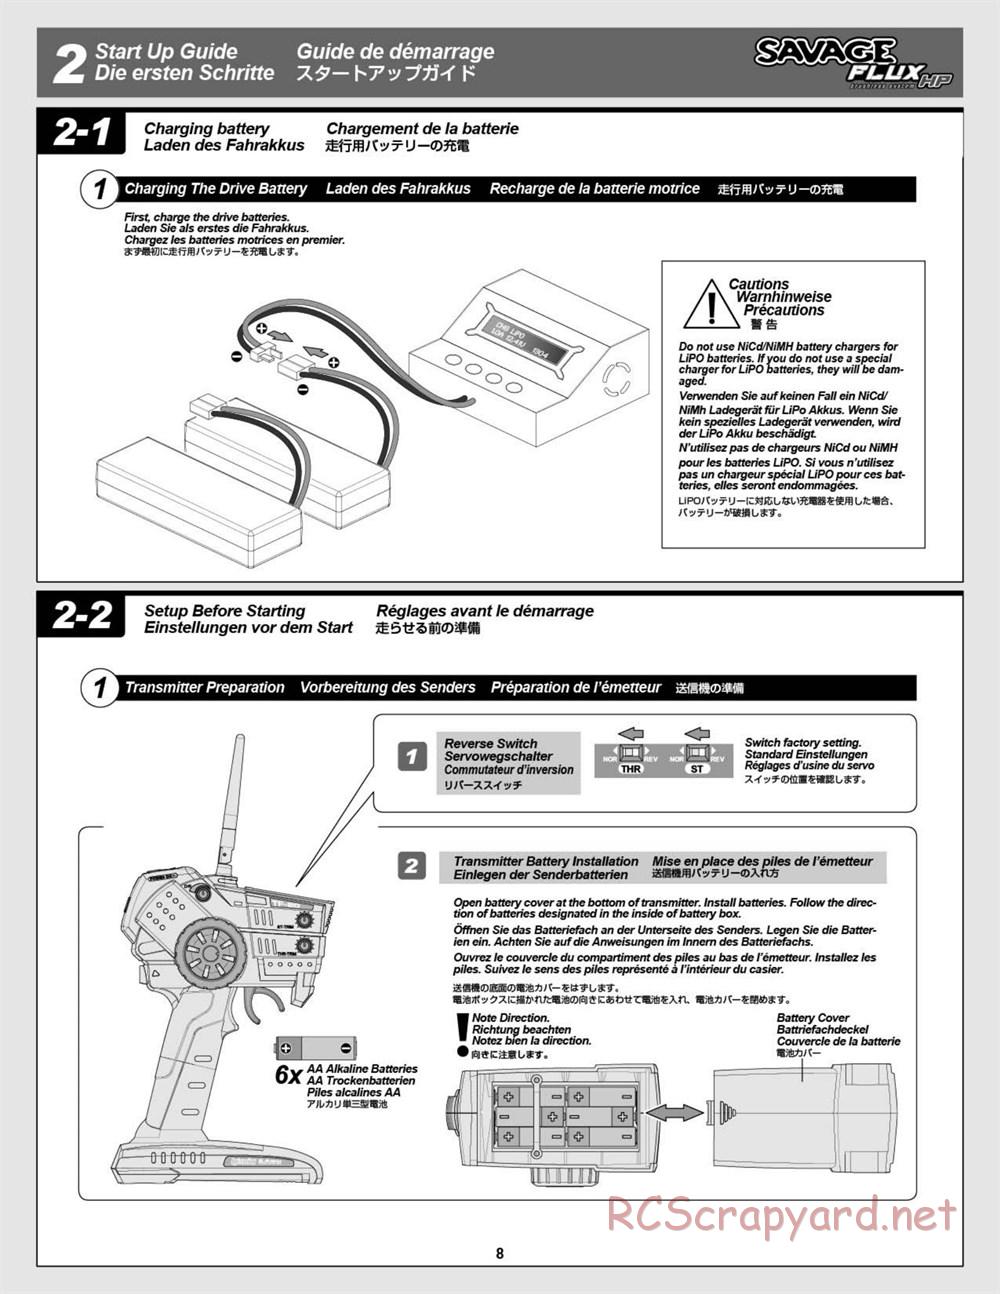 HPI - Savage Flux HP - Manual - Page 8